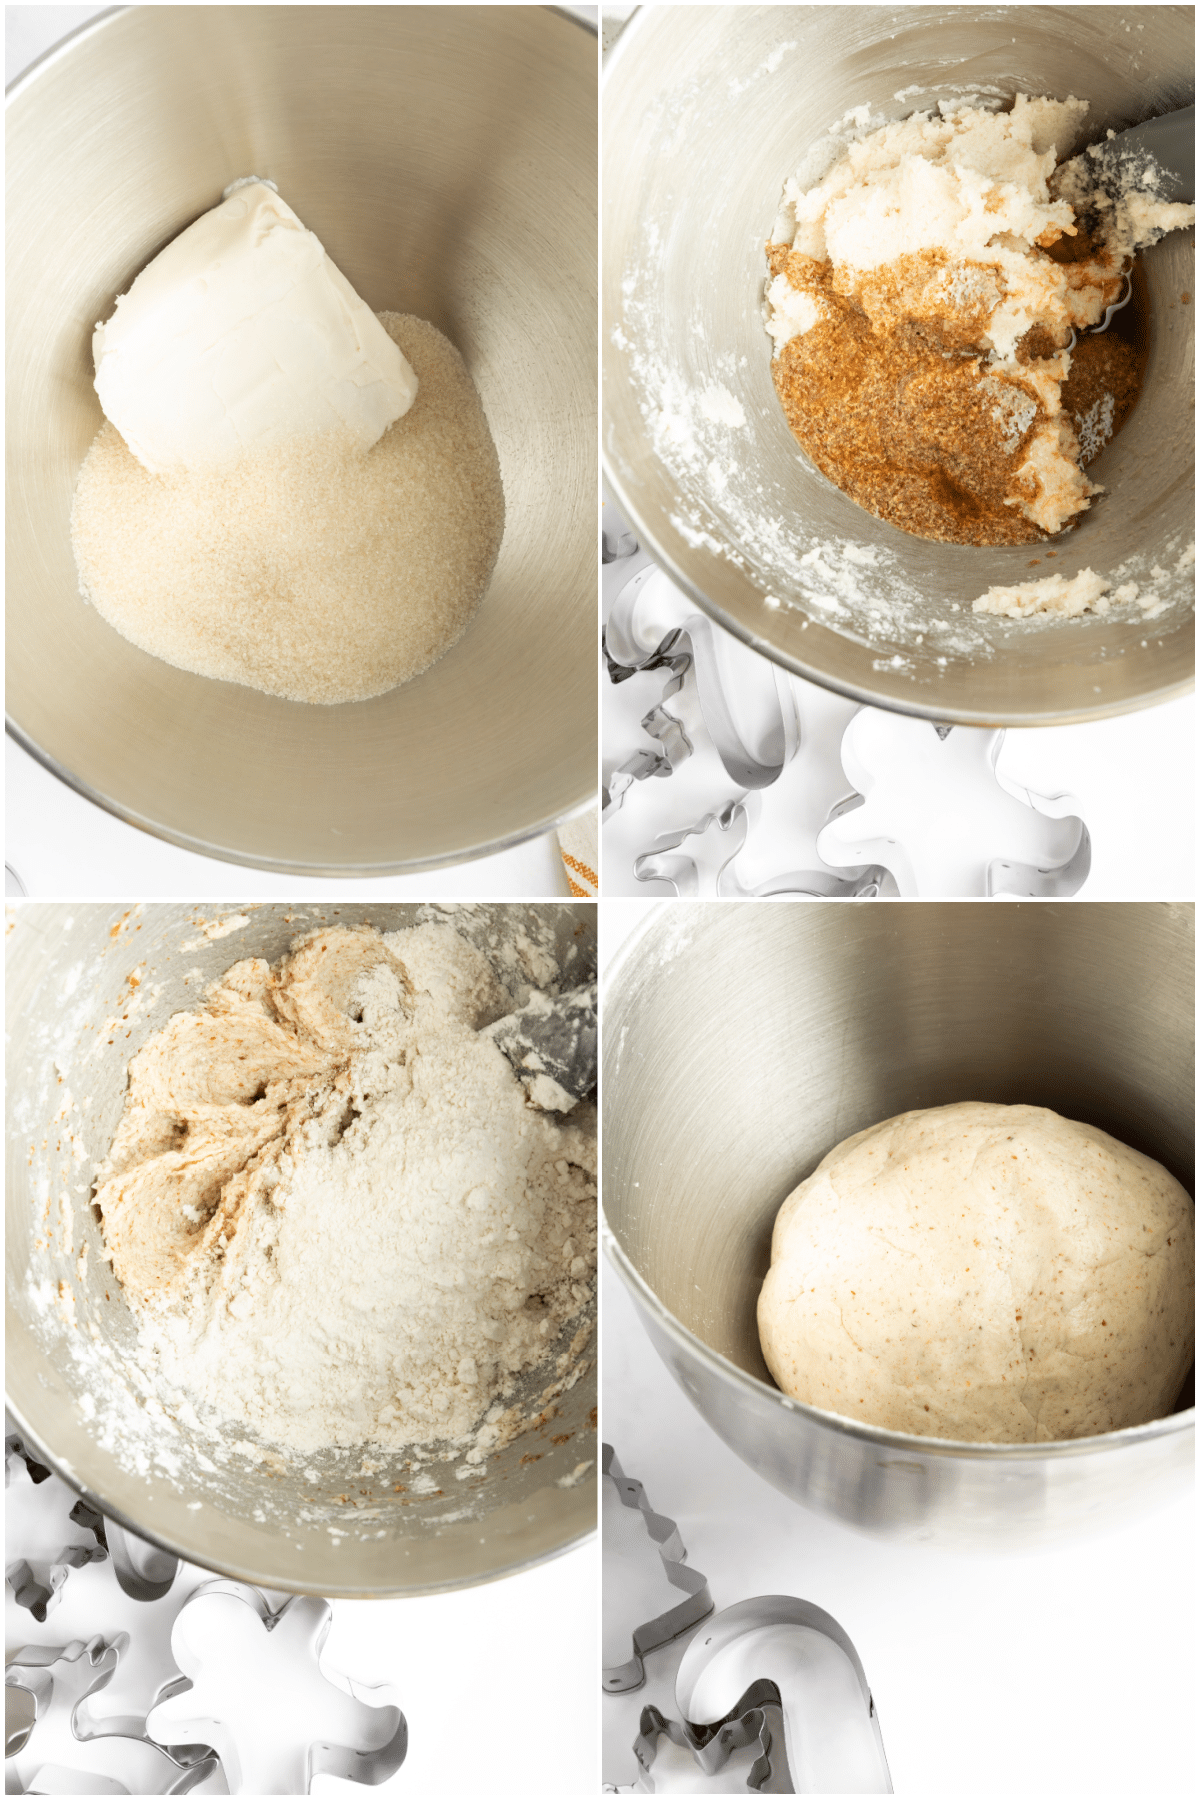 Four image collage shows how to make gluten free vegan cut out cookies that do not spread: cream together butter and sugar, add flax mixture and stir, add flour, combine to a cookie dough to be rolled out and cut.